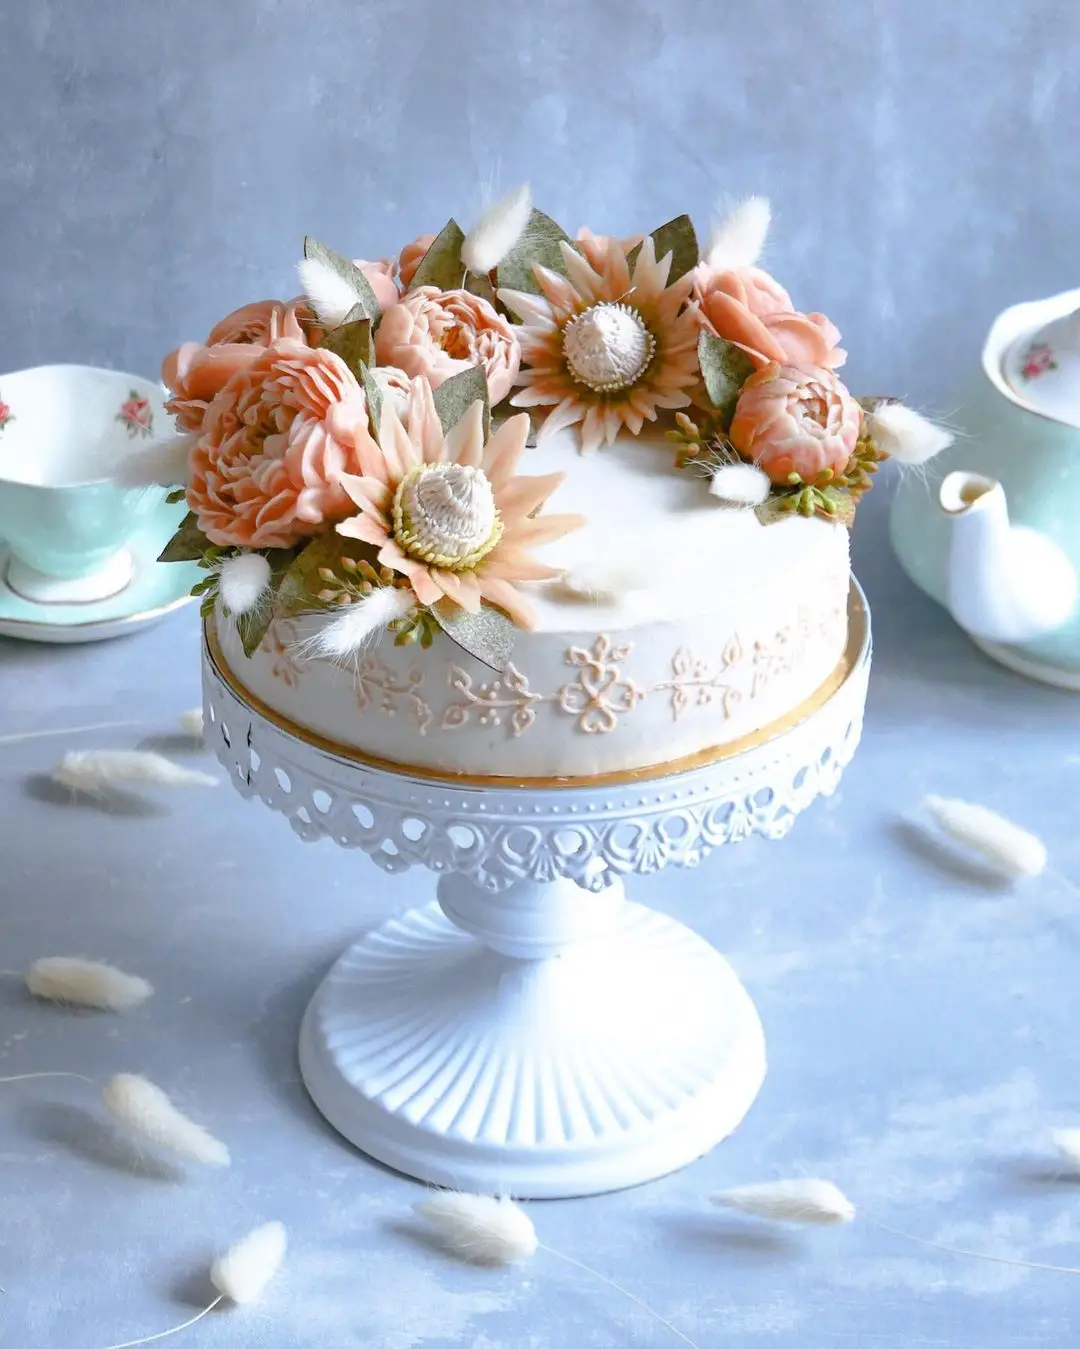 Unique Designs Thatll Give You Wedding Cake Inspiration ...